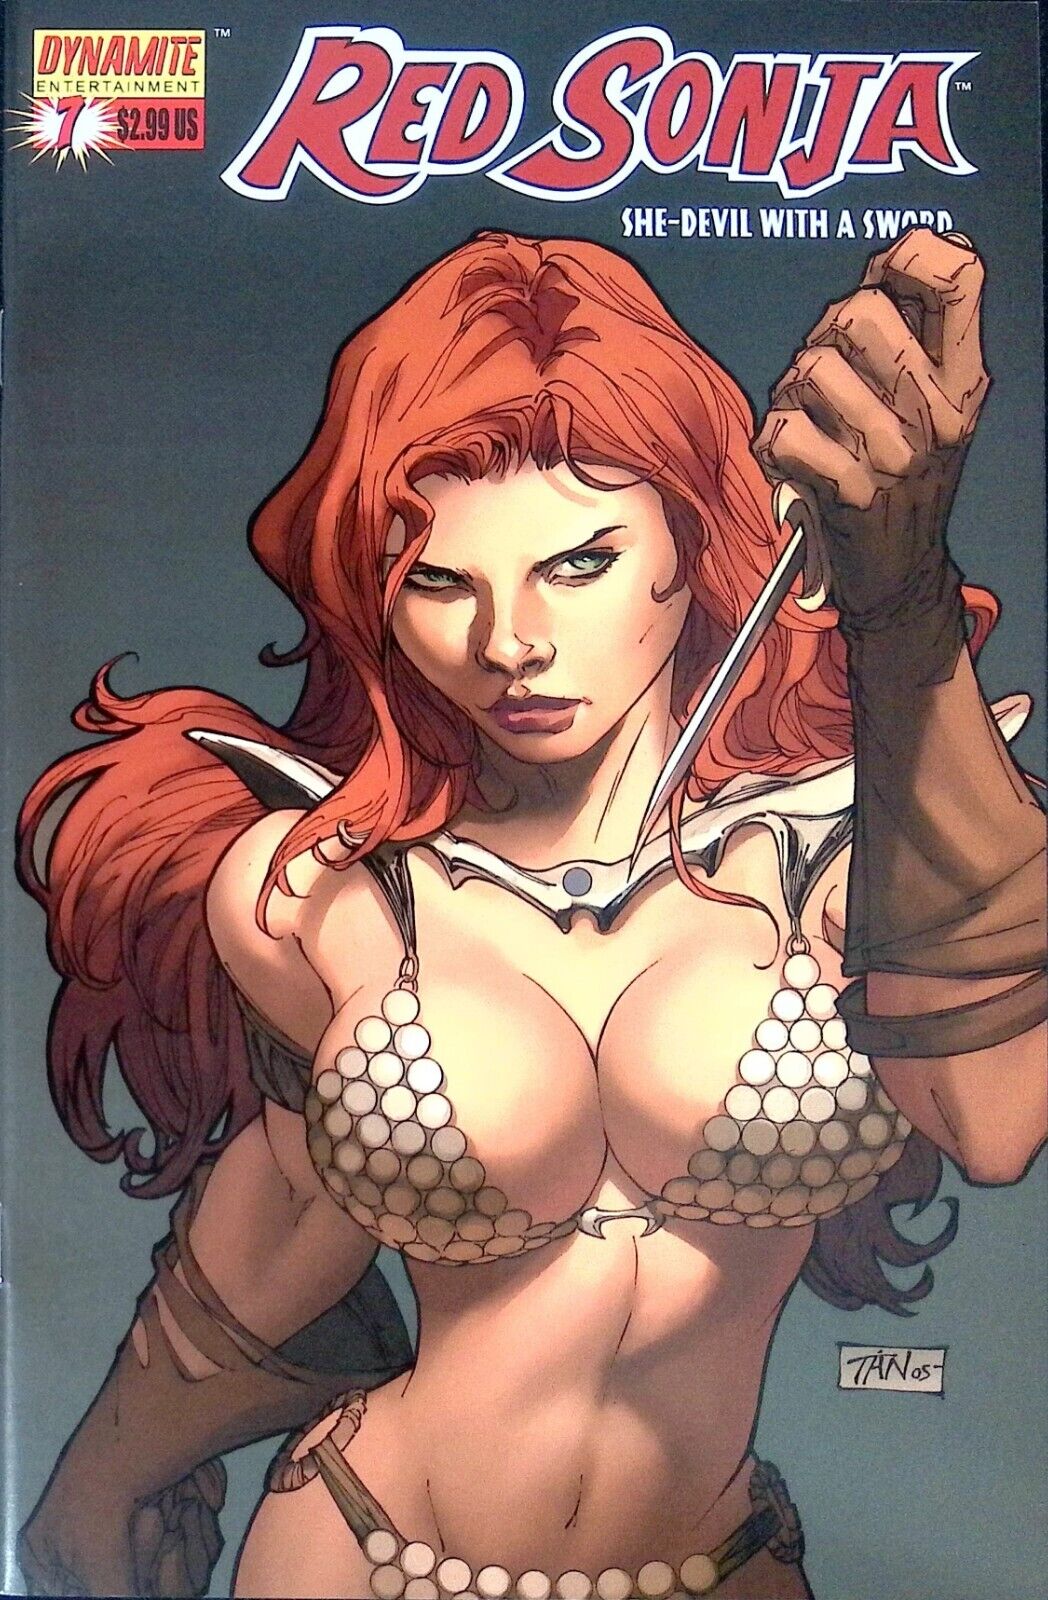 Red Sonja #7 - High Grade Billy Tan Cover Variant